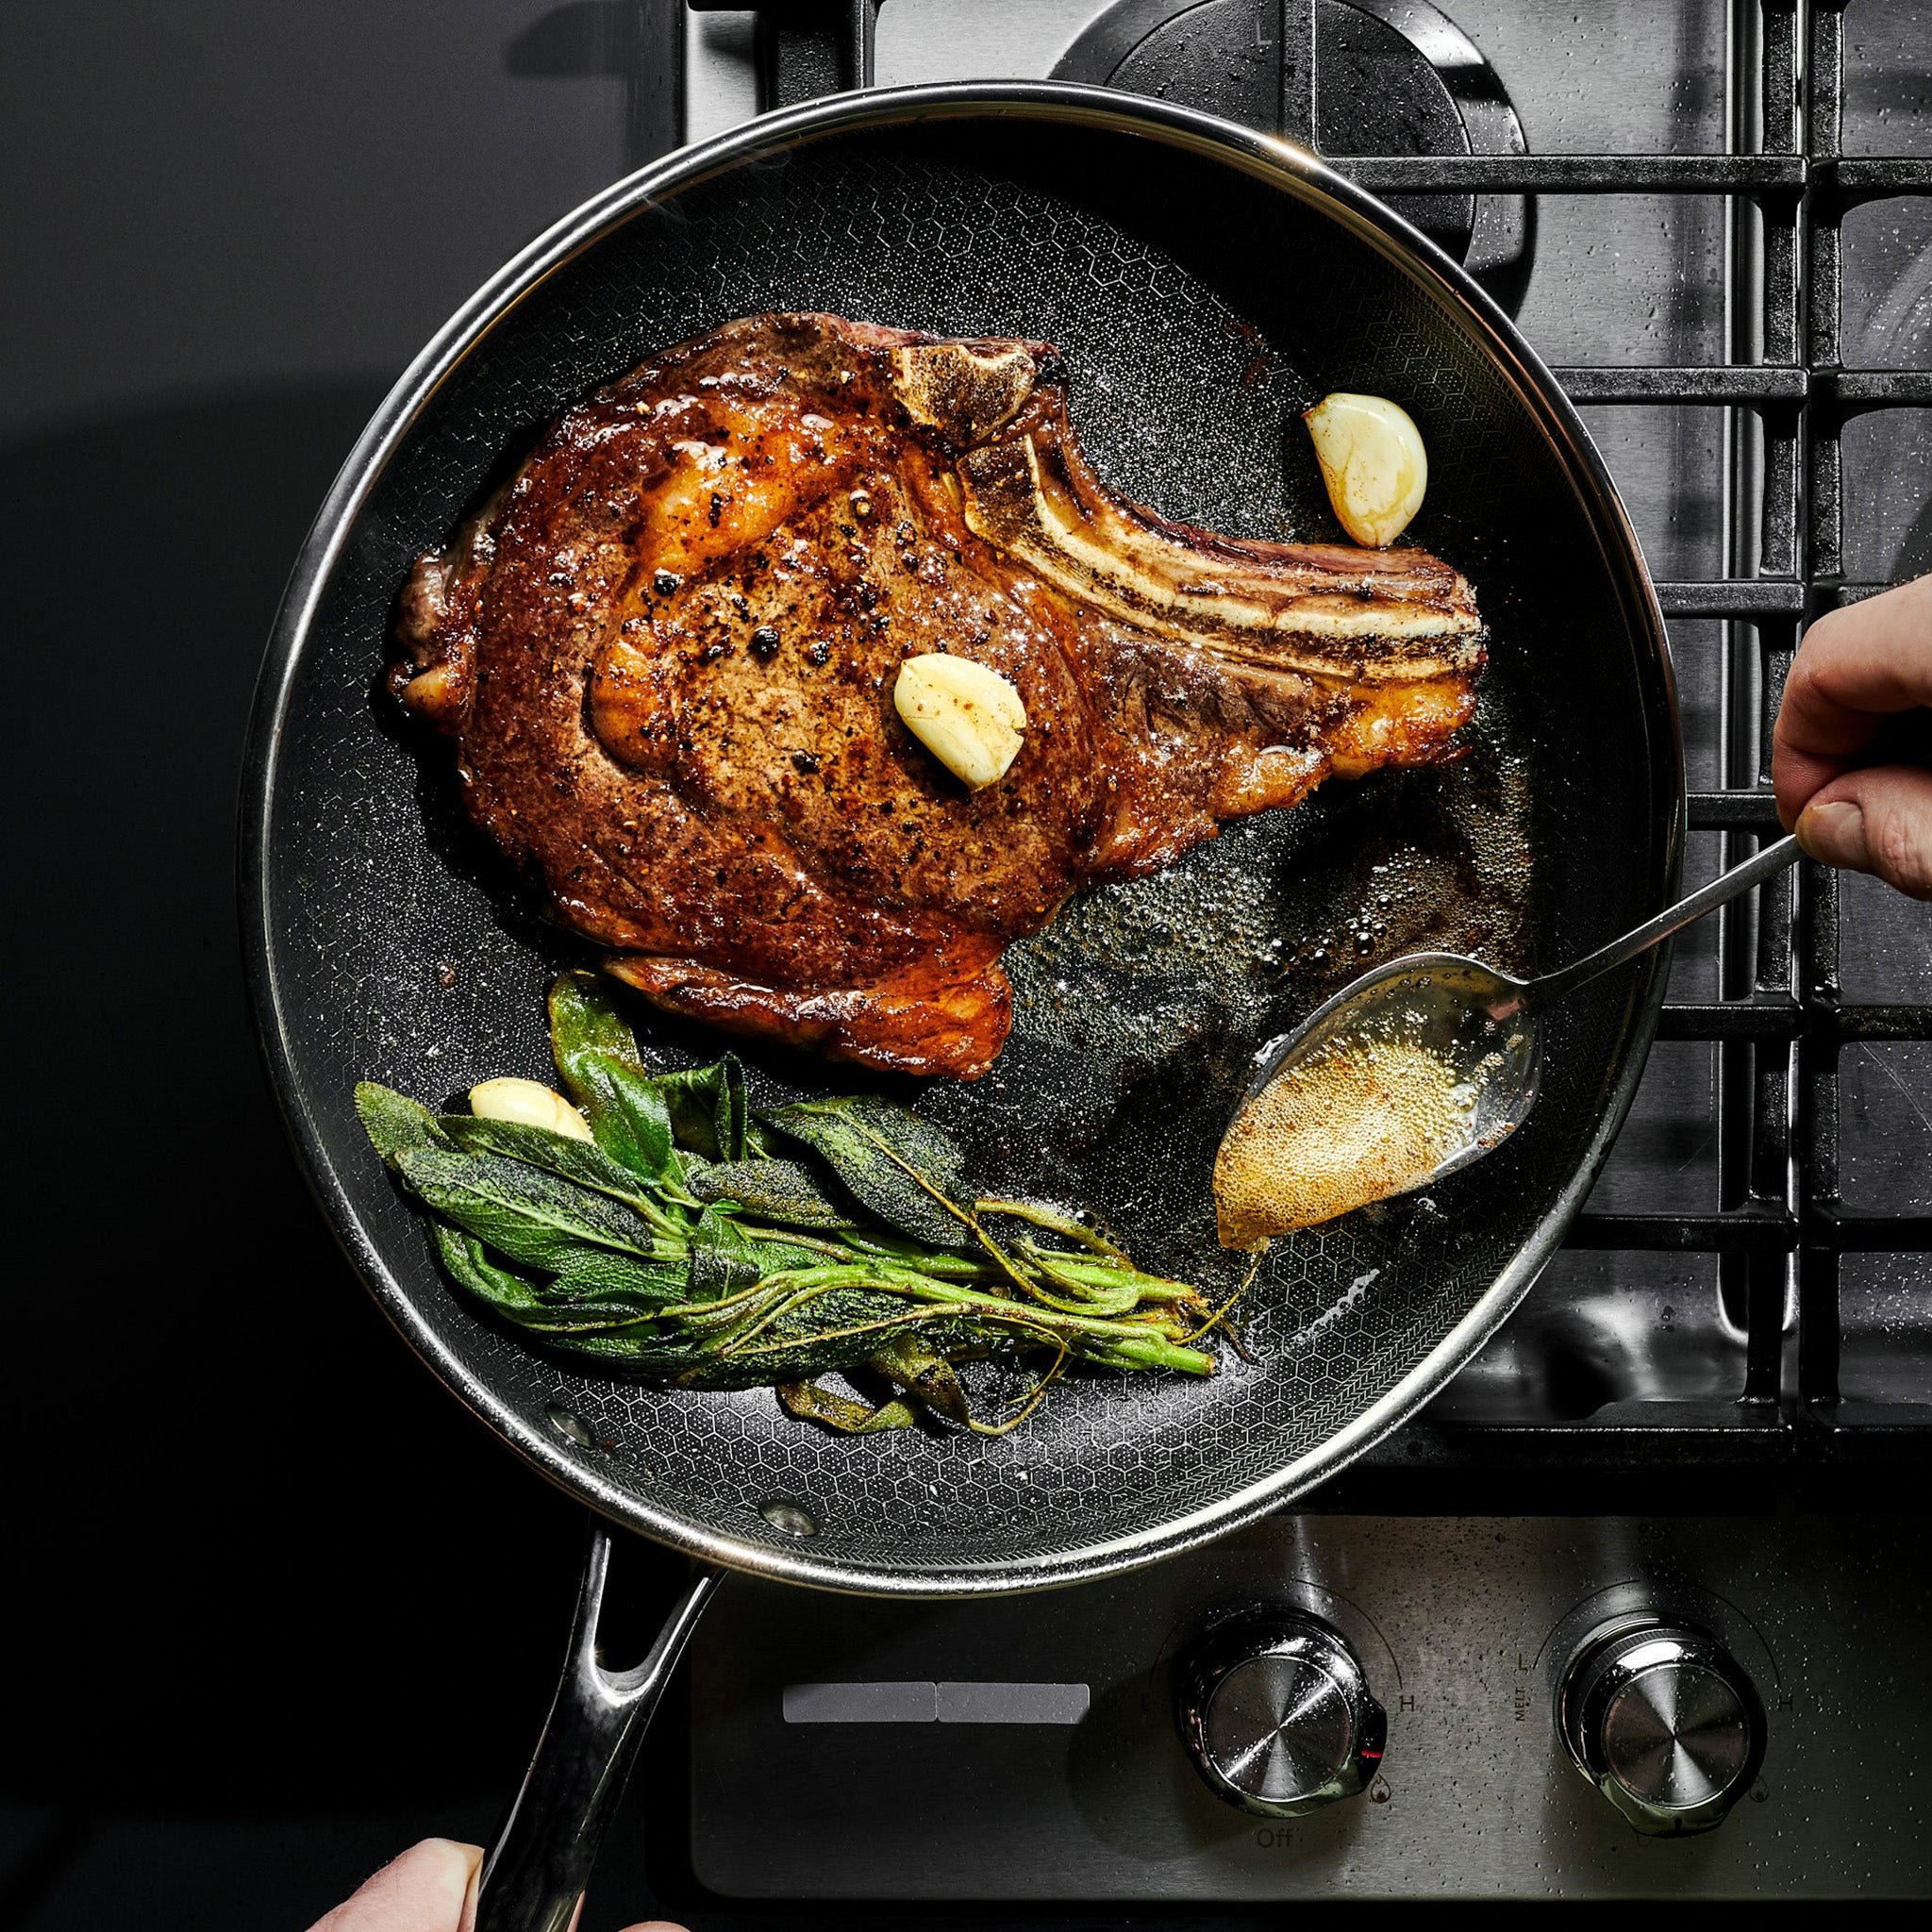 Seared ribeye steak with garlic and herbs in a skillet on a stovetop burner.